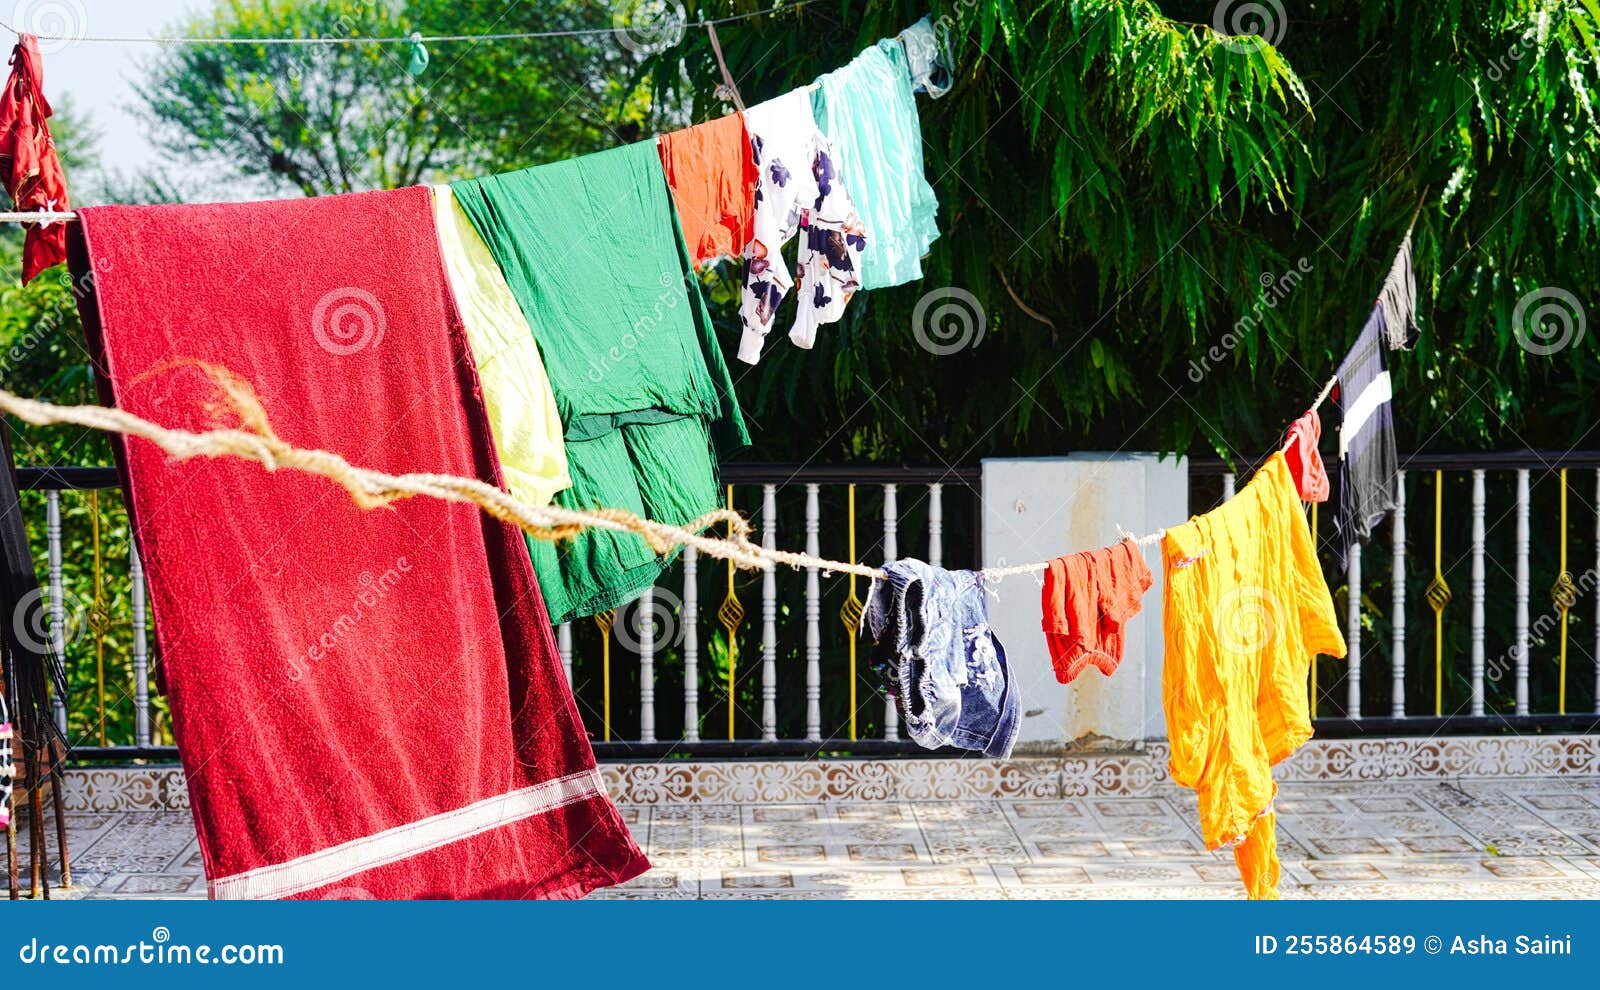 https://thumbs.dreamstime.com/z/laundry-drying-balcony-building-line-clothes-green-tree-background-roof-rope-clean-outdoors-day-colorful-hanging-255864589.jpg